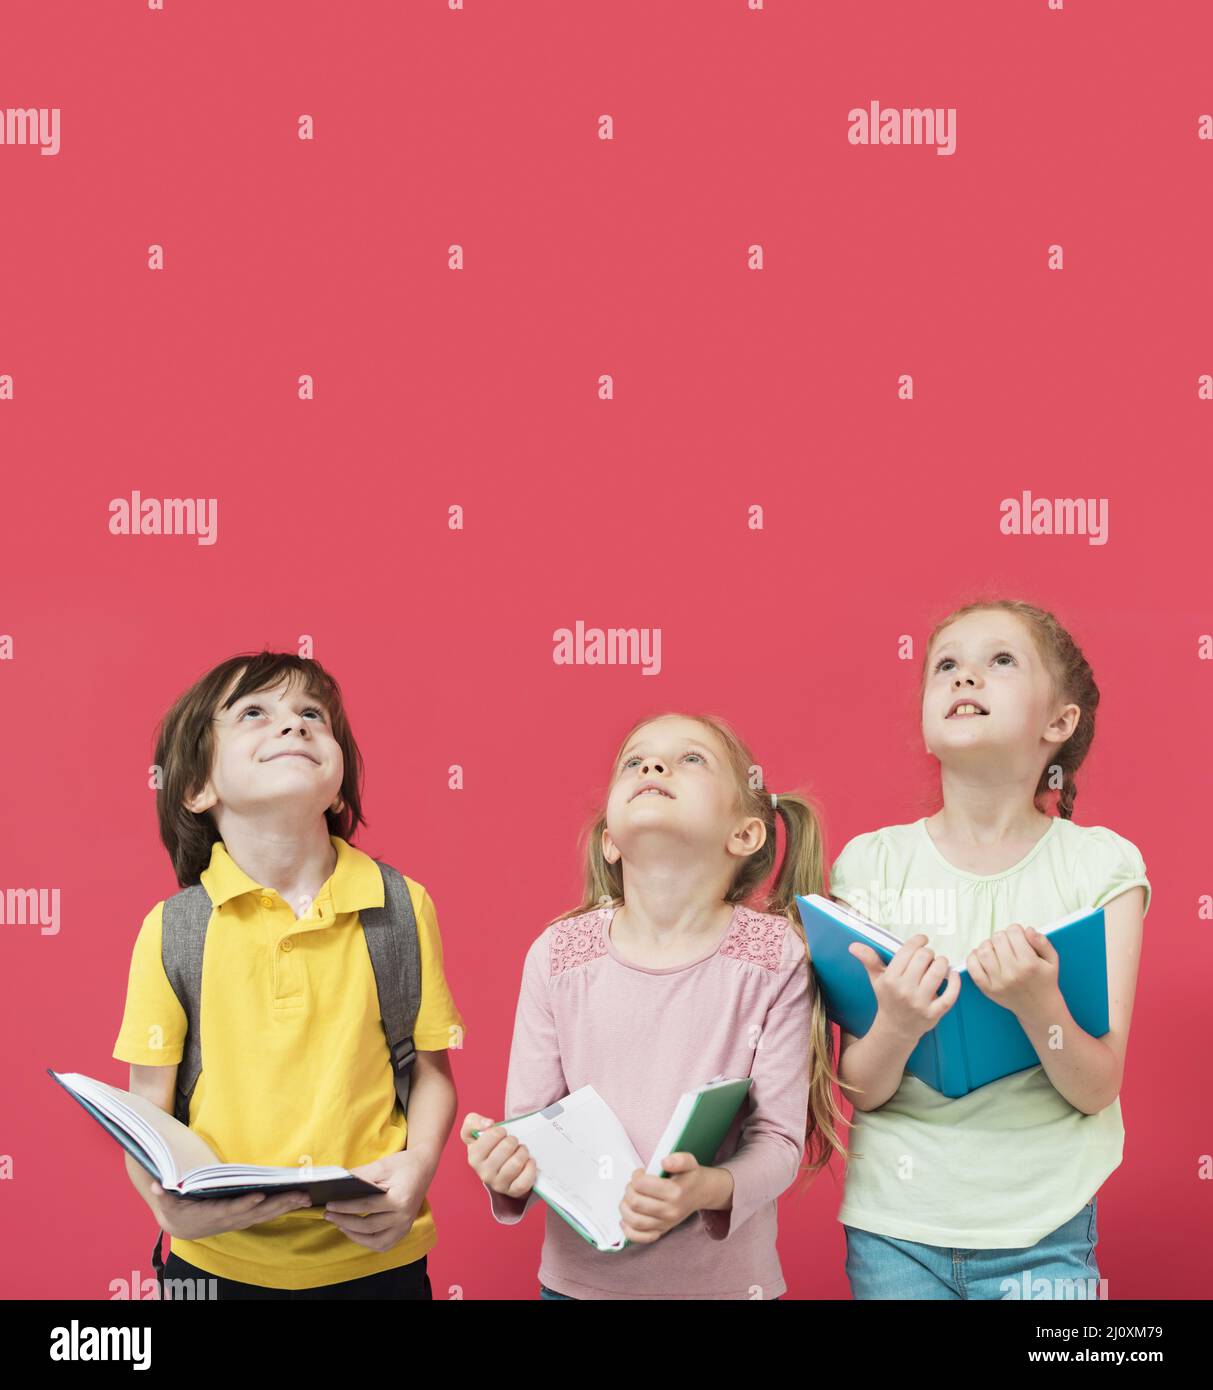 Little kids looking up together. High quality beautiful photo concept Stock Photo